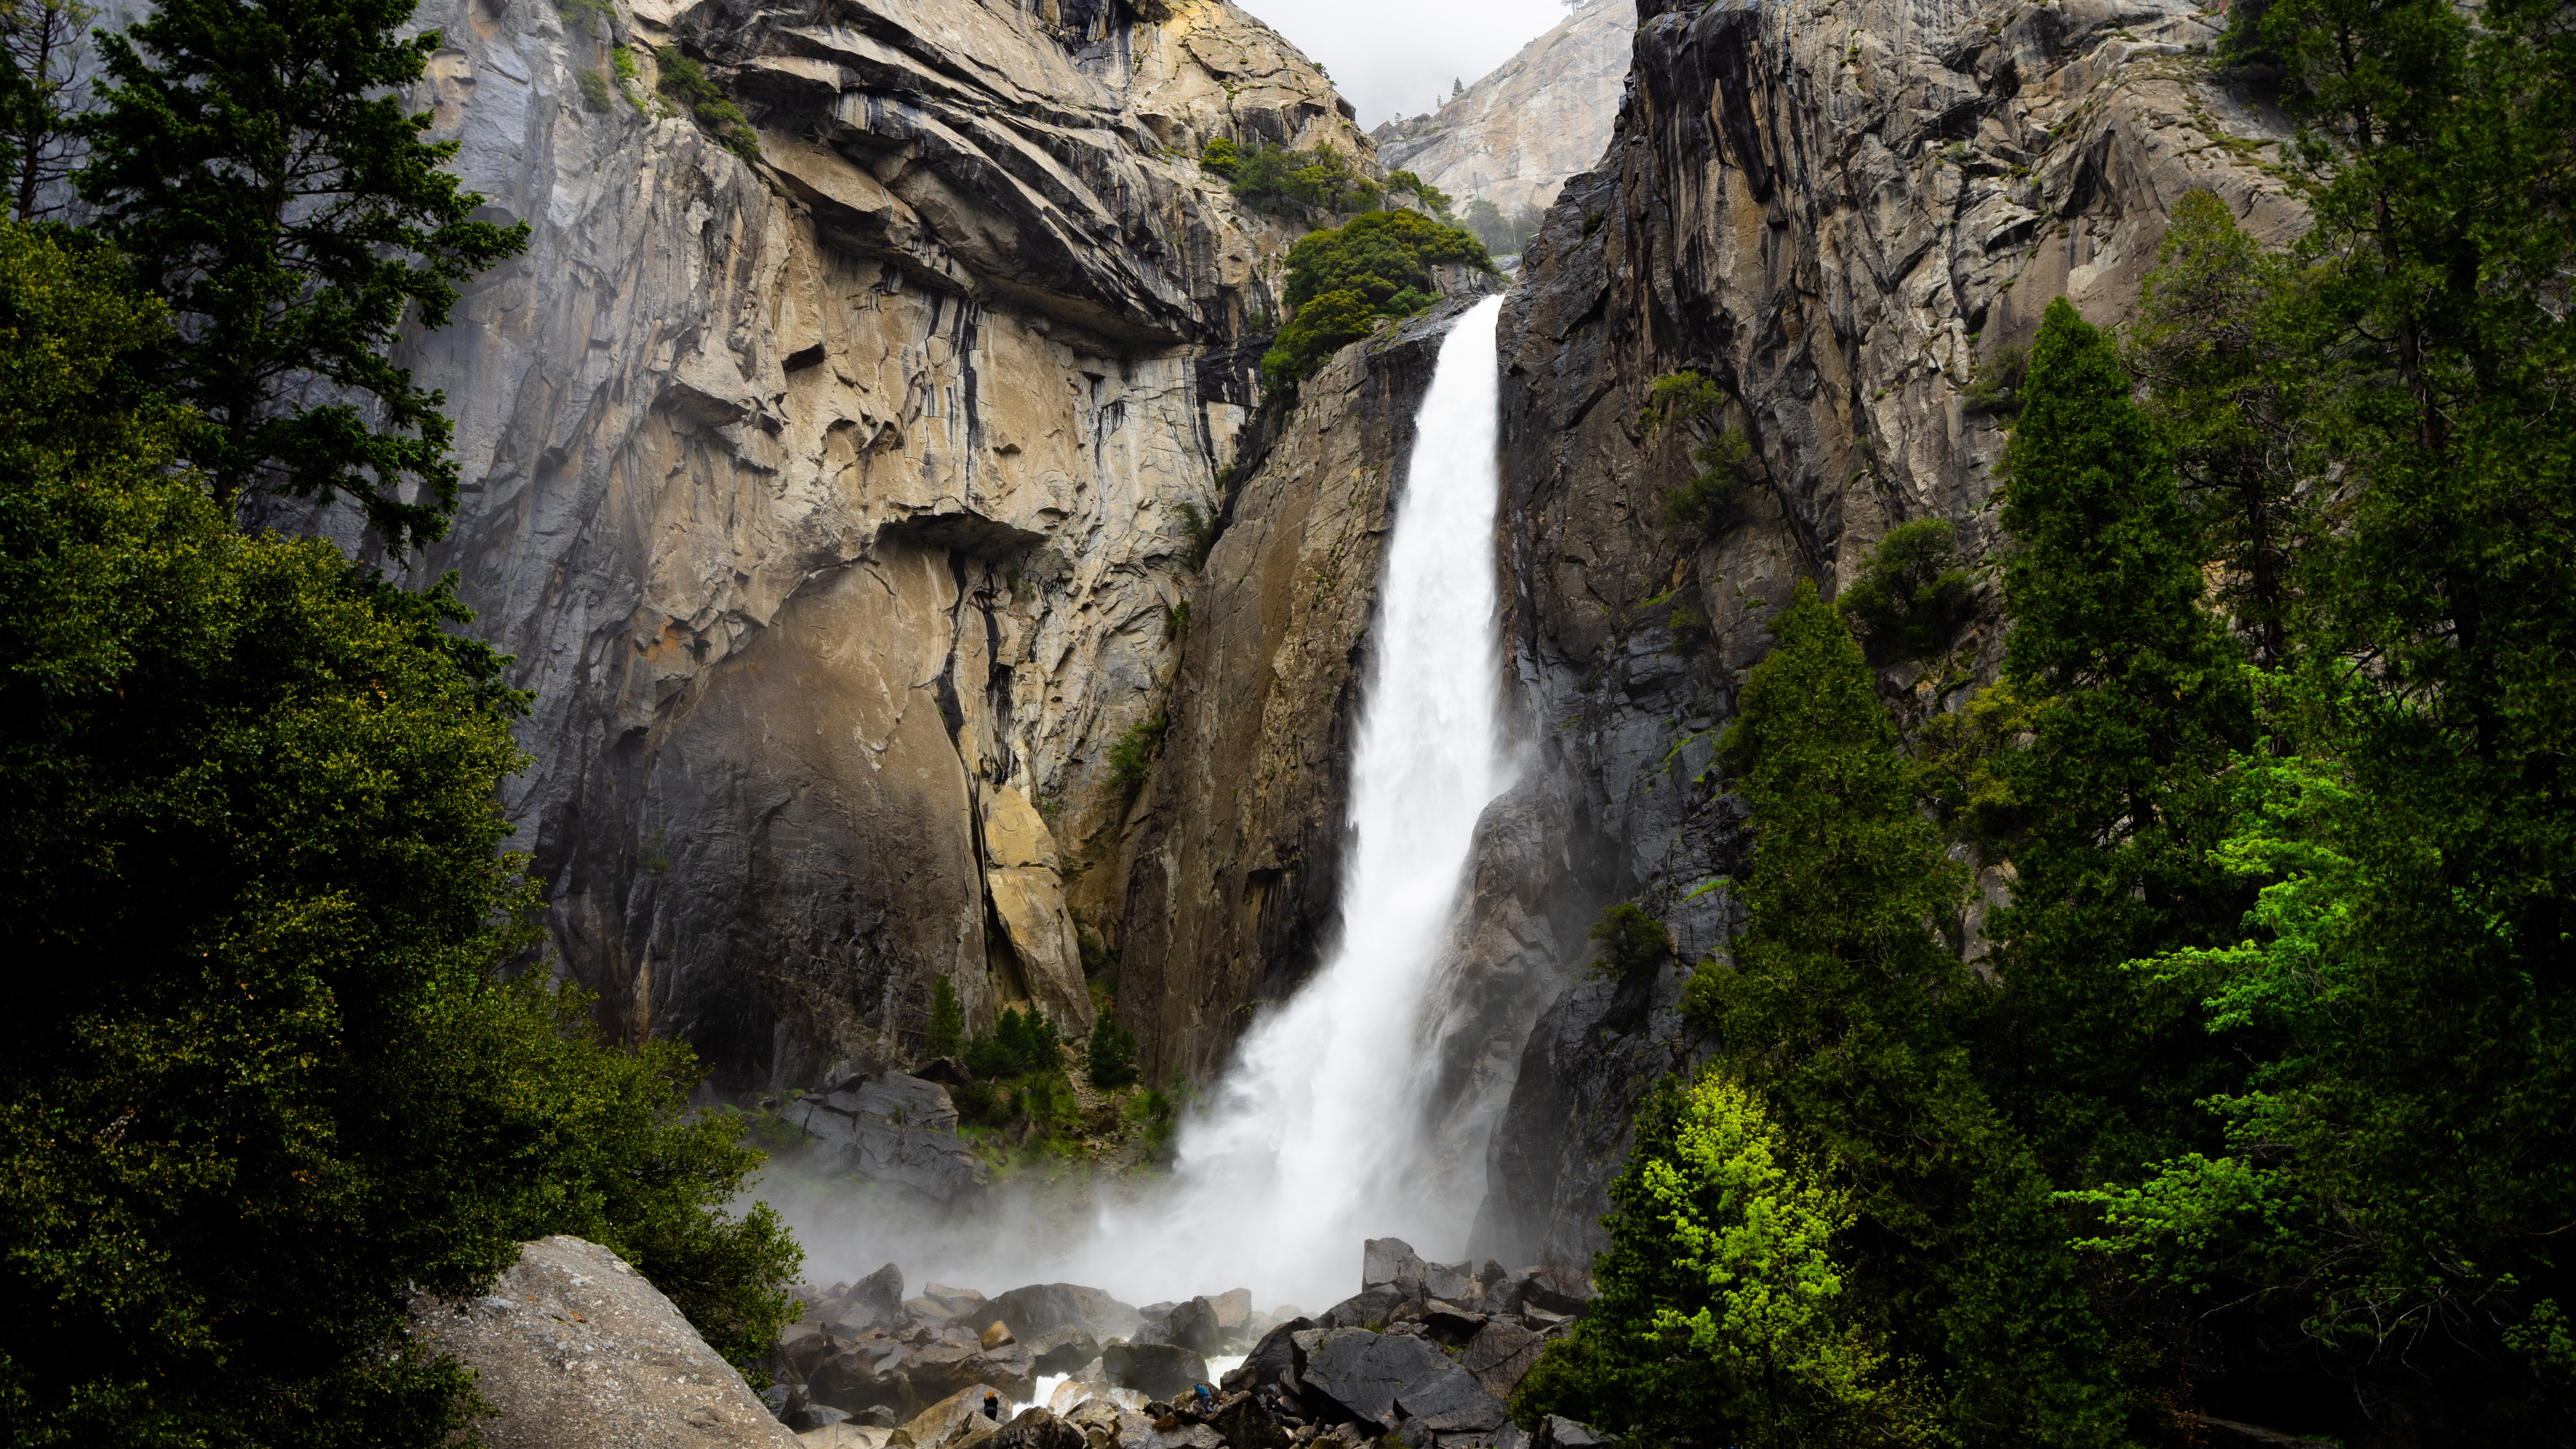 WATCH: The Top Five Hikes in Yosemite National Park